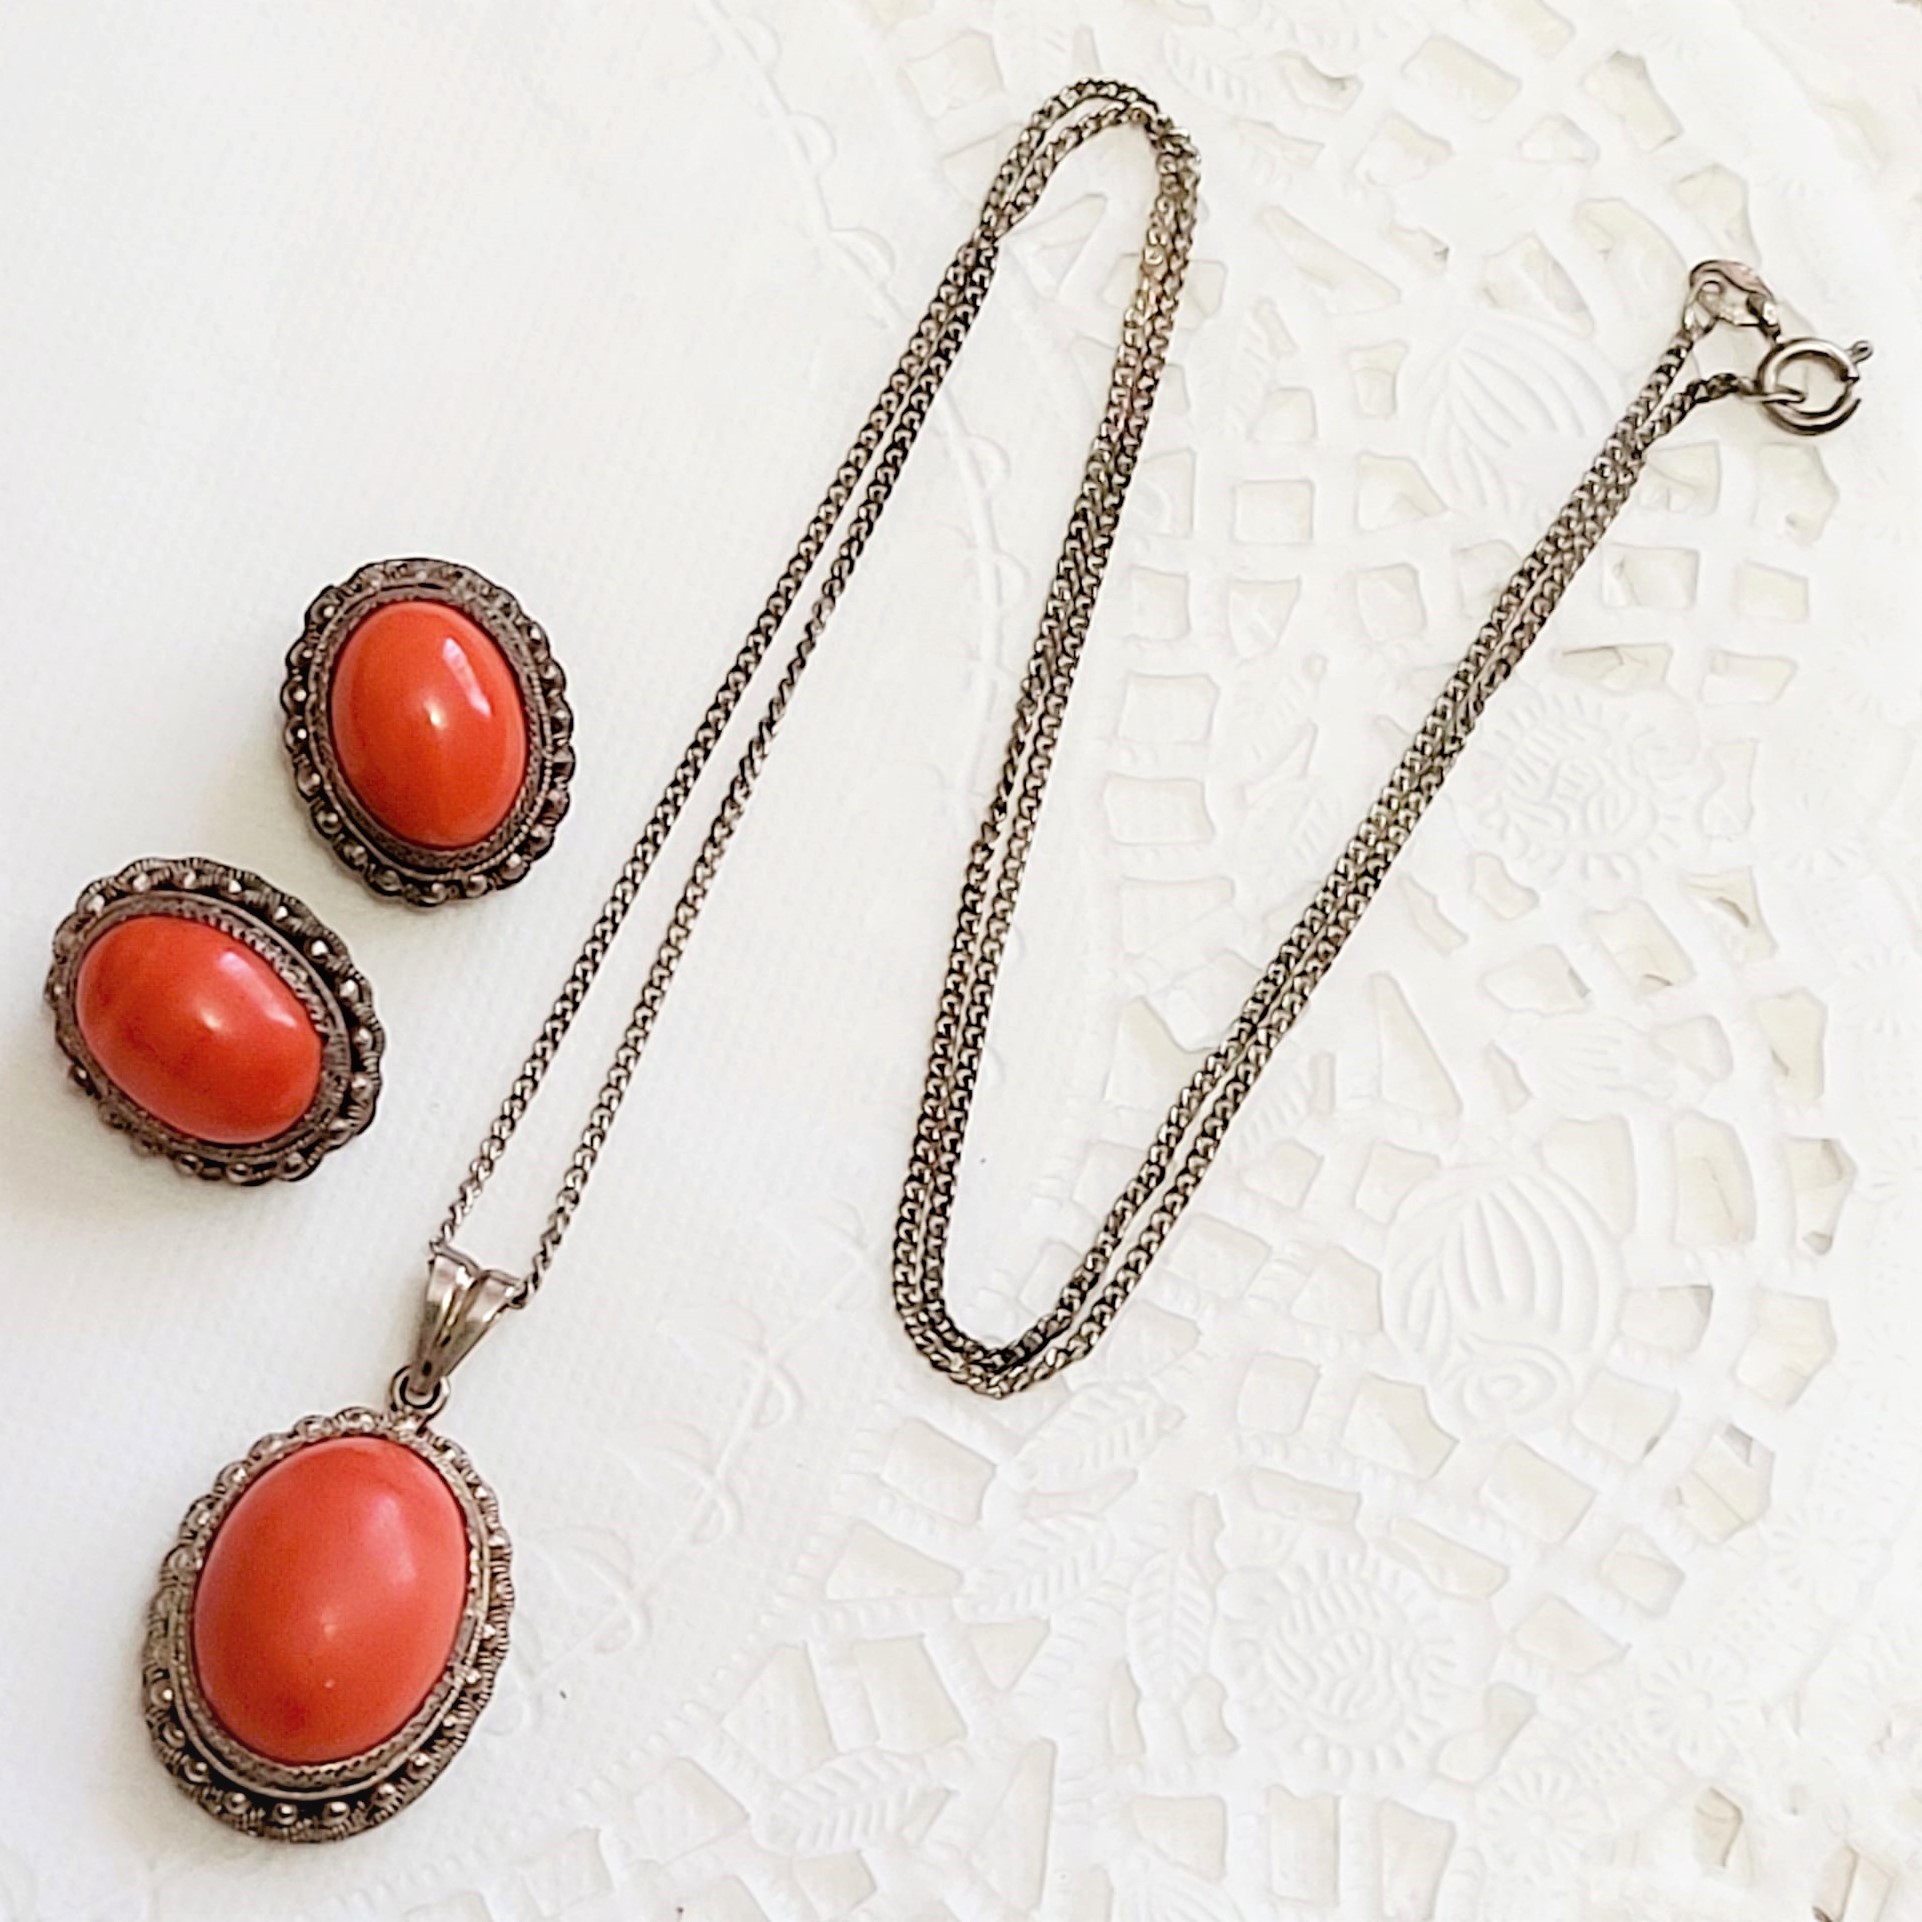 Coral and Sterling Silver Pendant Necklace & Earrings Set